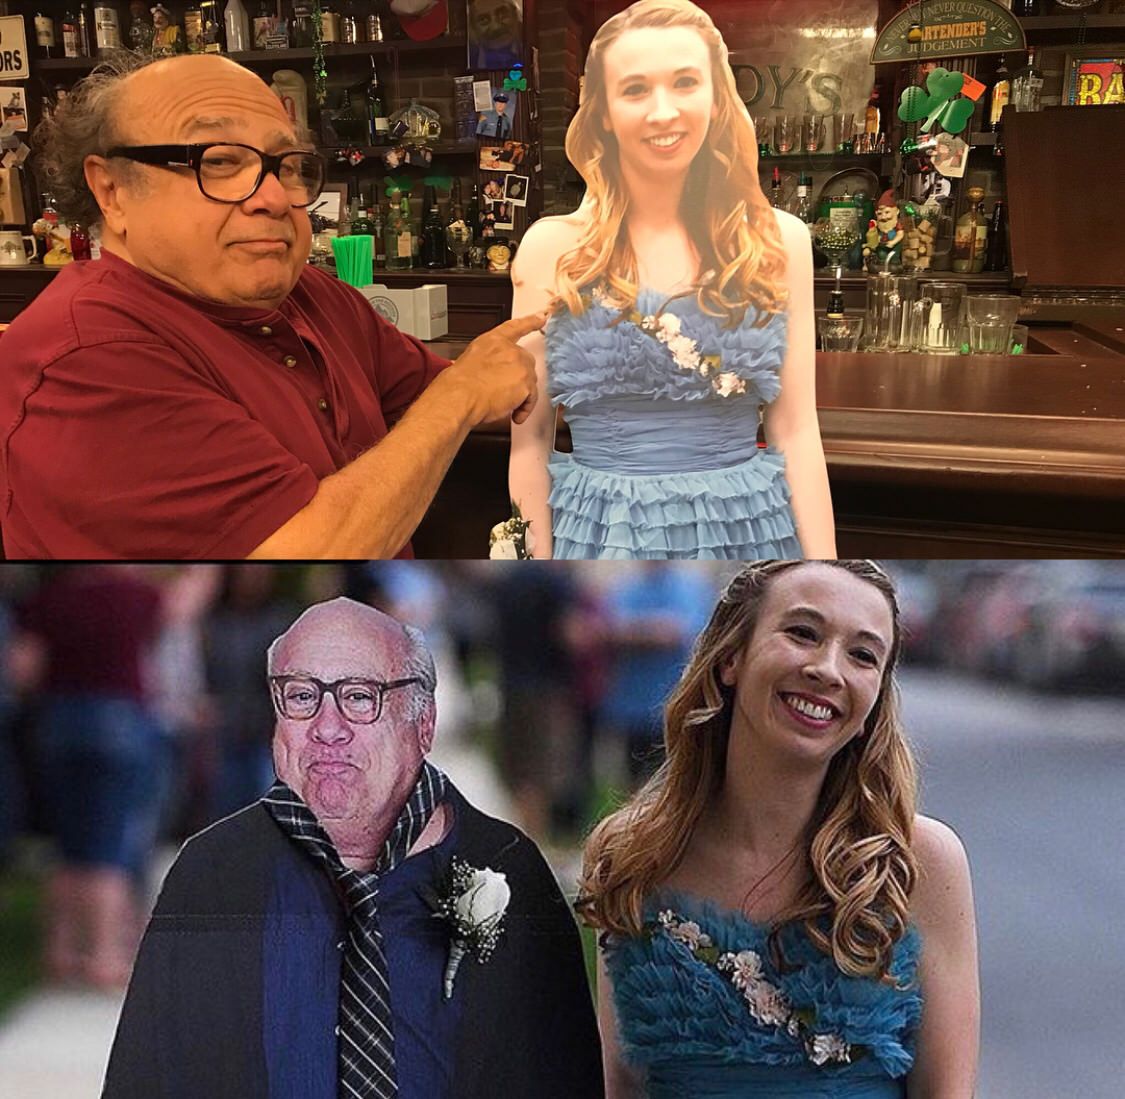 Girl takes cardboard cutout of Danny DeVito to prom, so Danny DeVito takes cardboard cutout of the girl to Paddy’s Pub